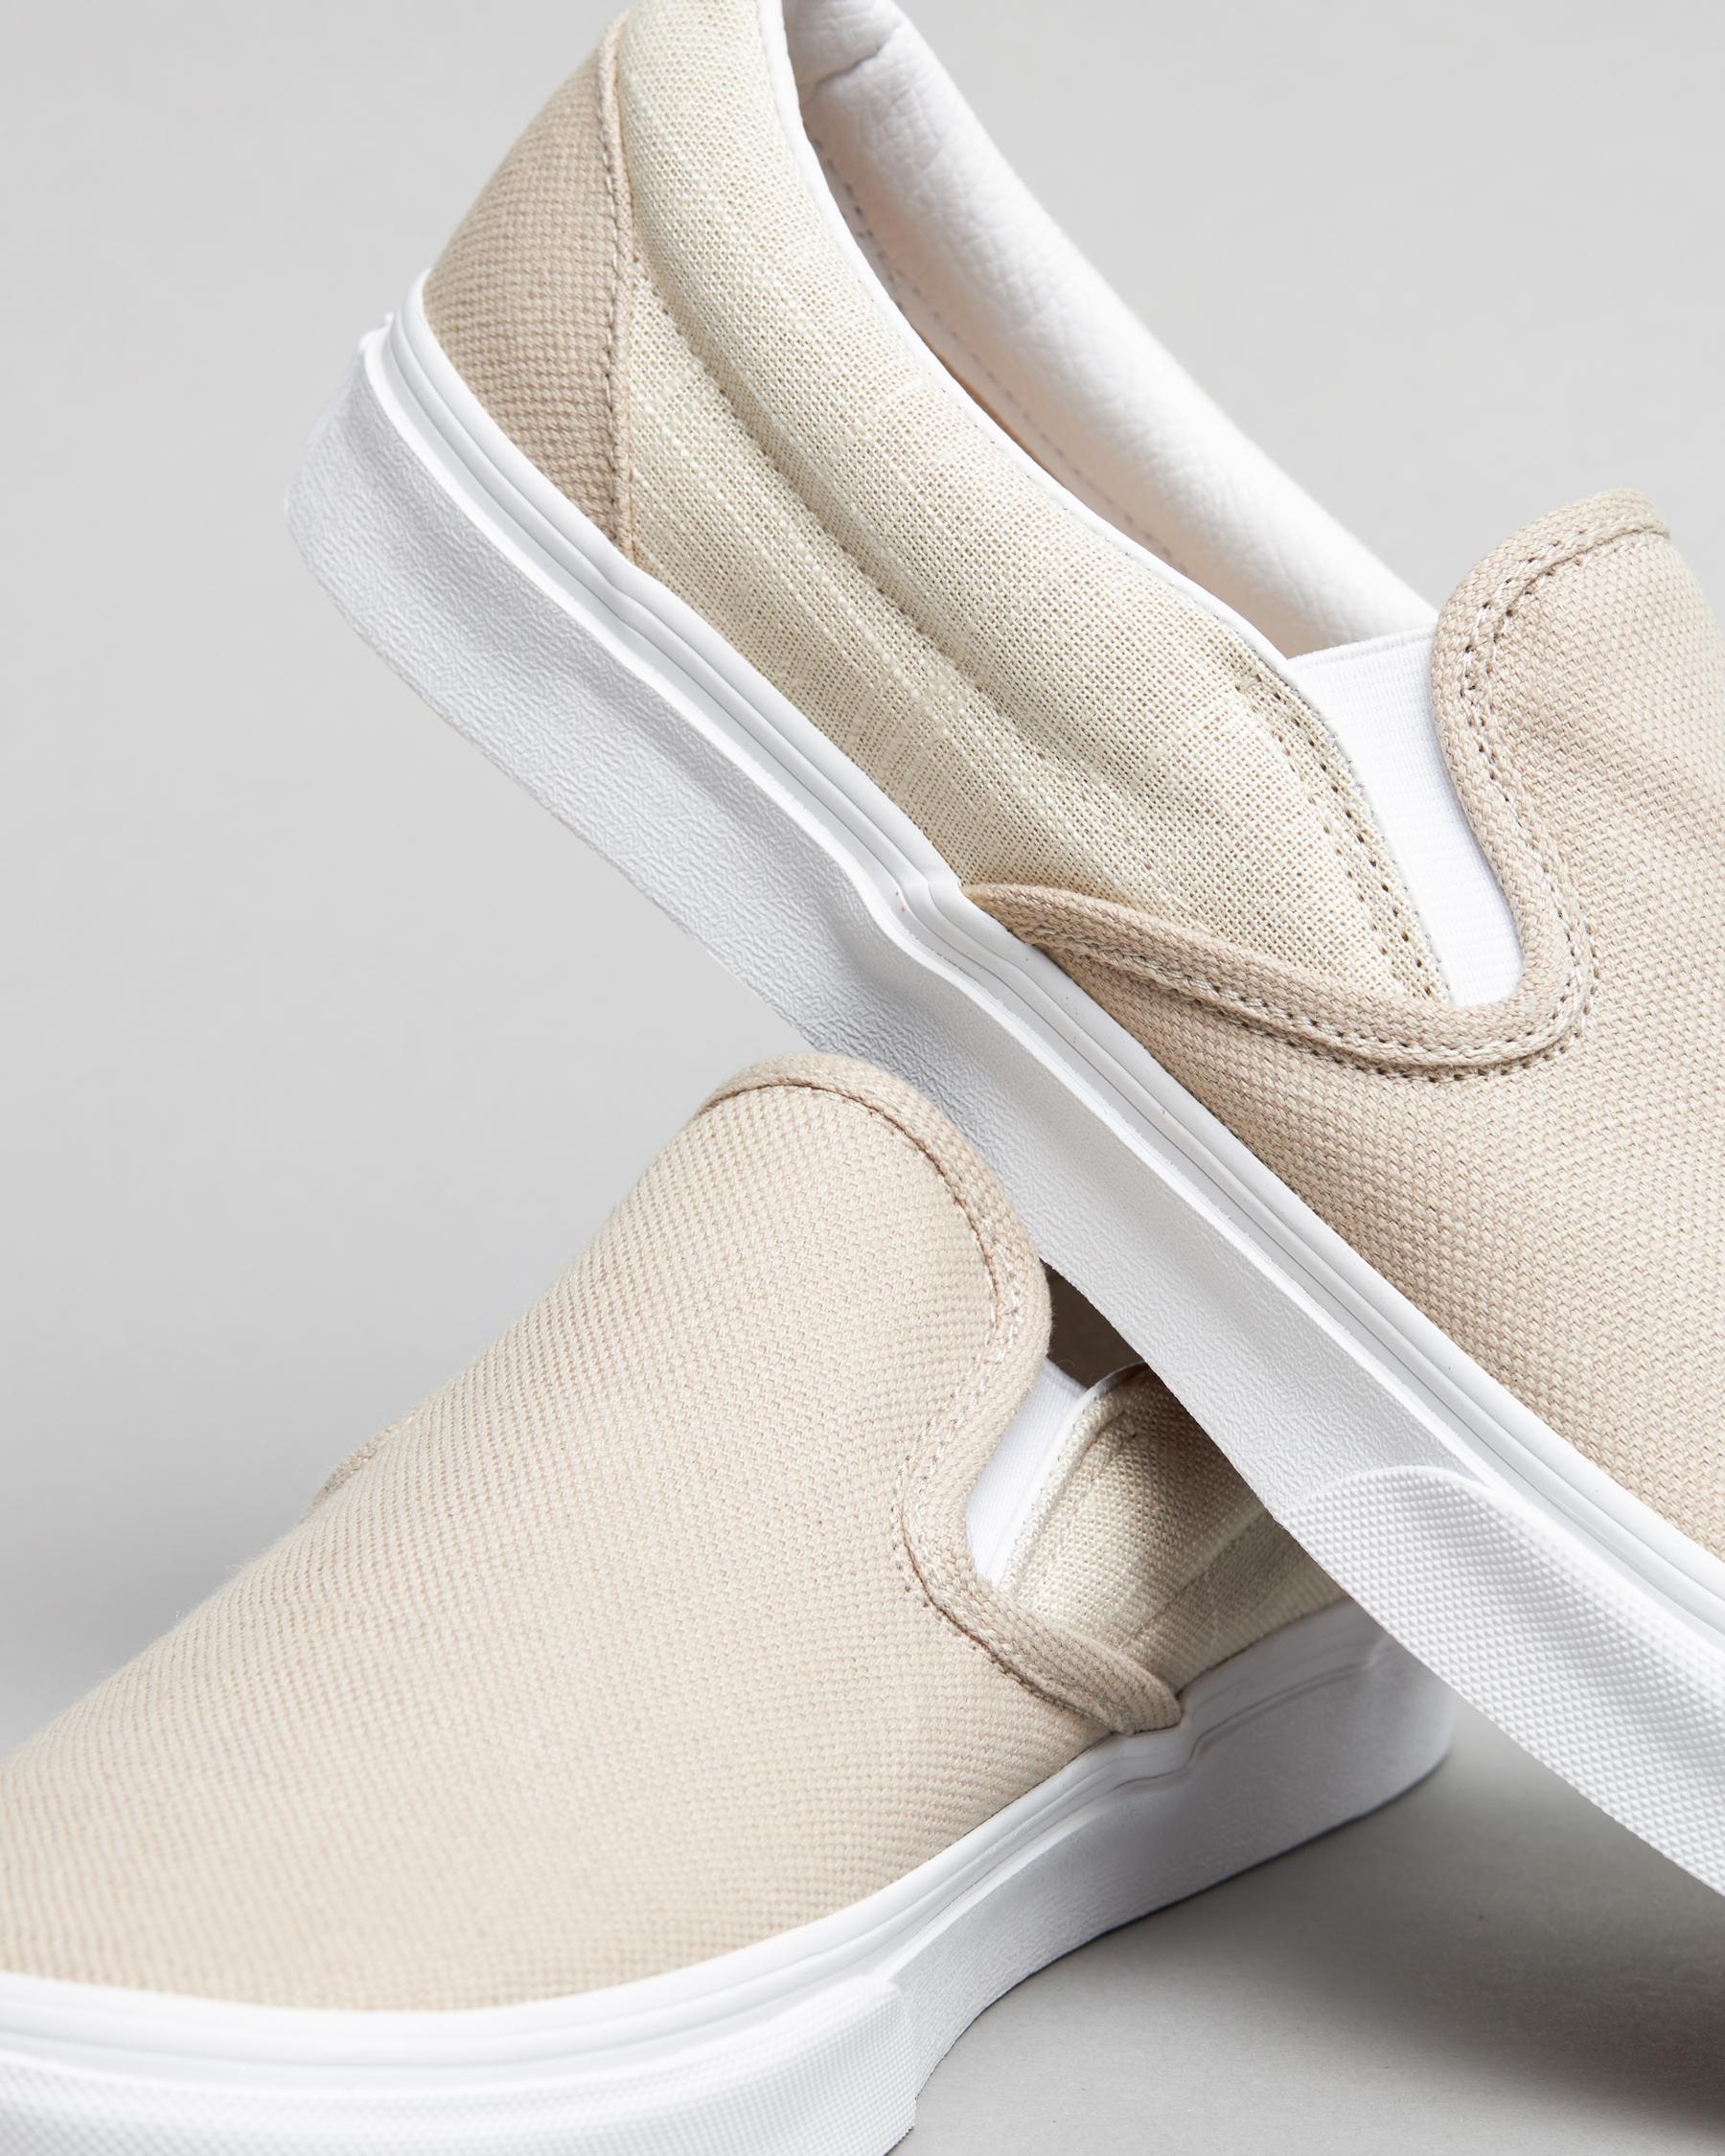 Vans Classic Slip-On Shoes In Colour Theory Summer Linen Natural - Fast ...